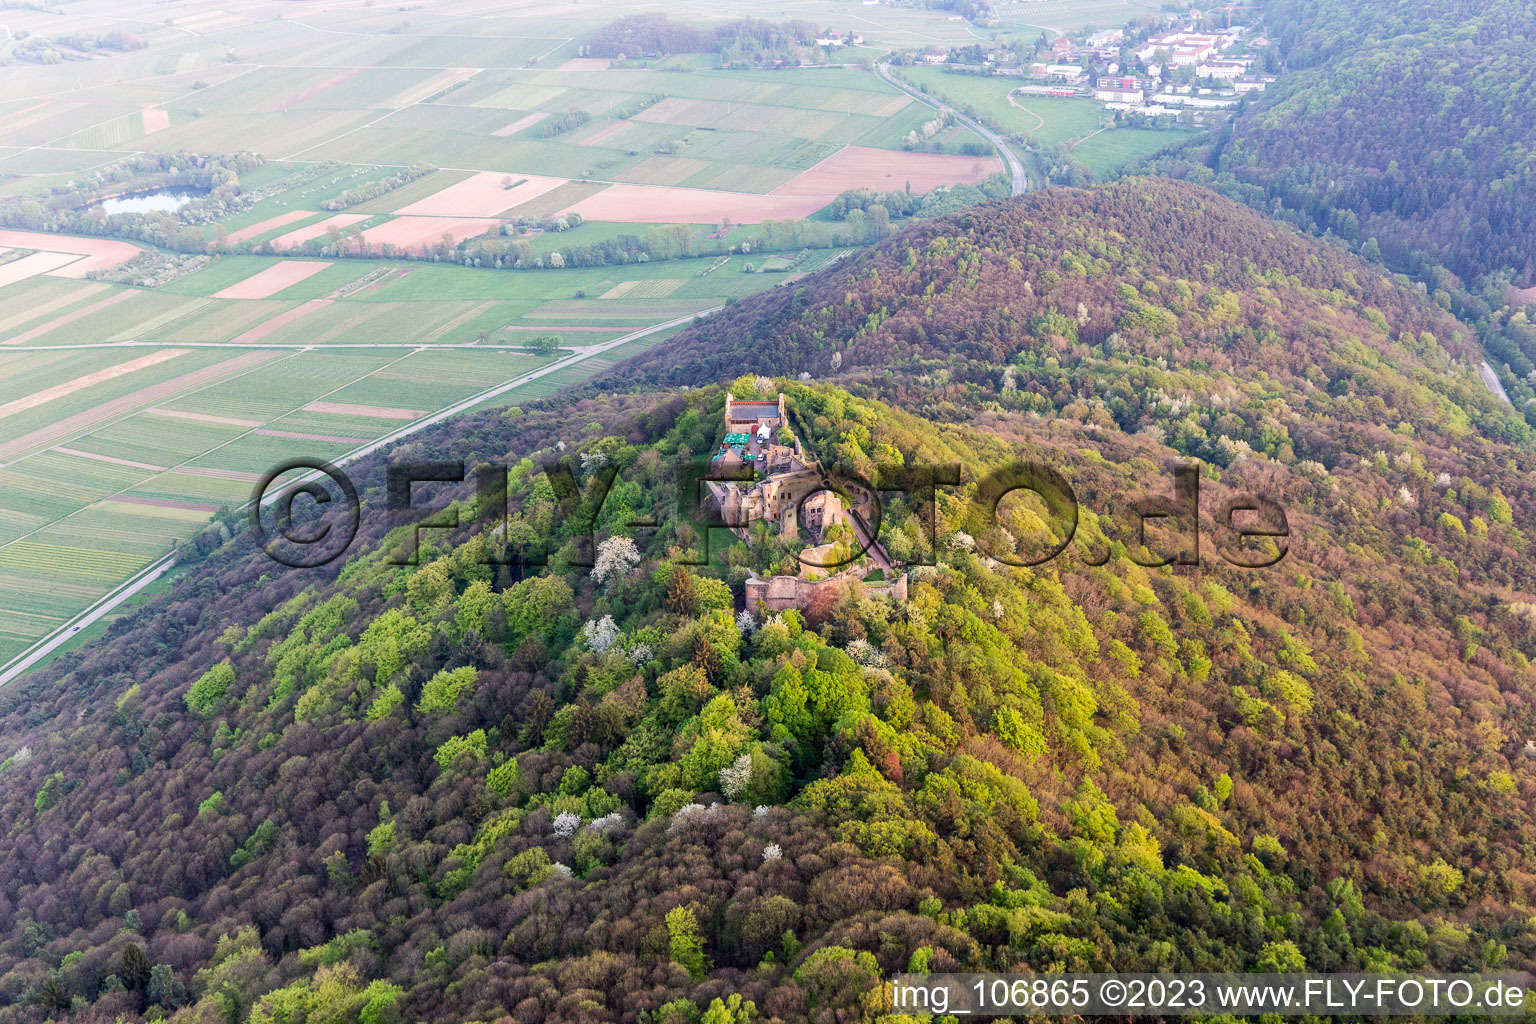 Madenburg in Eschbach in the state Rhineland-Palatinate, Germany from the drone perspective